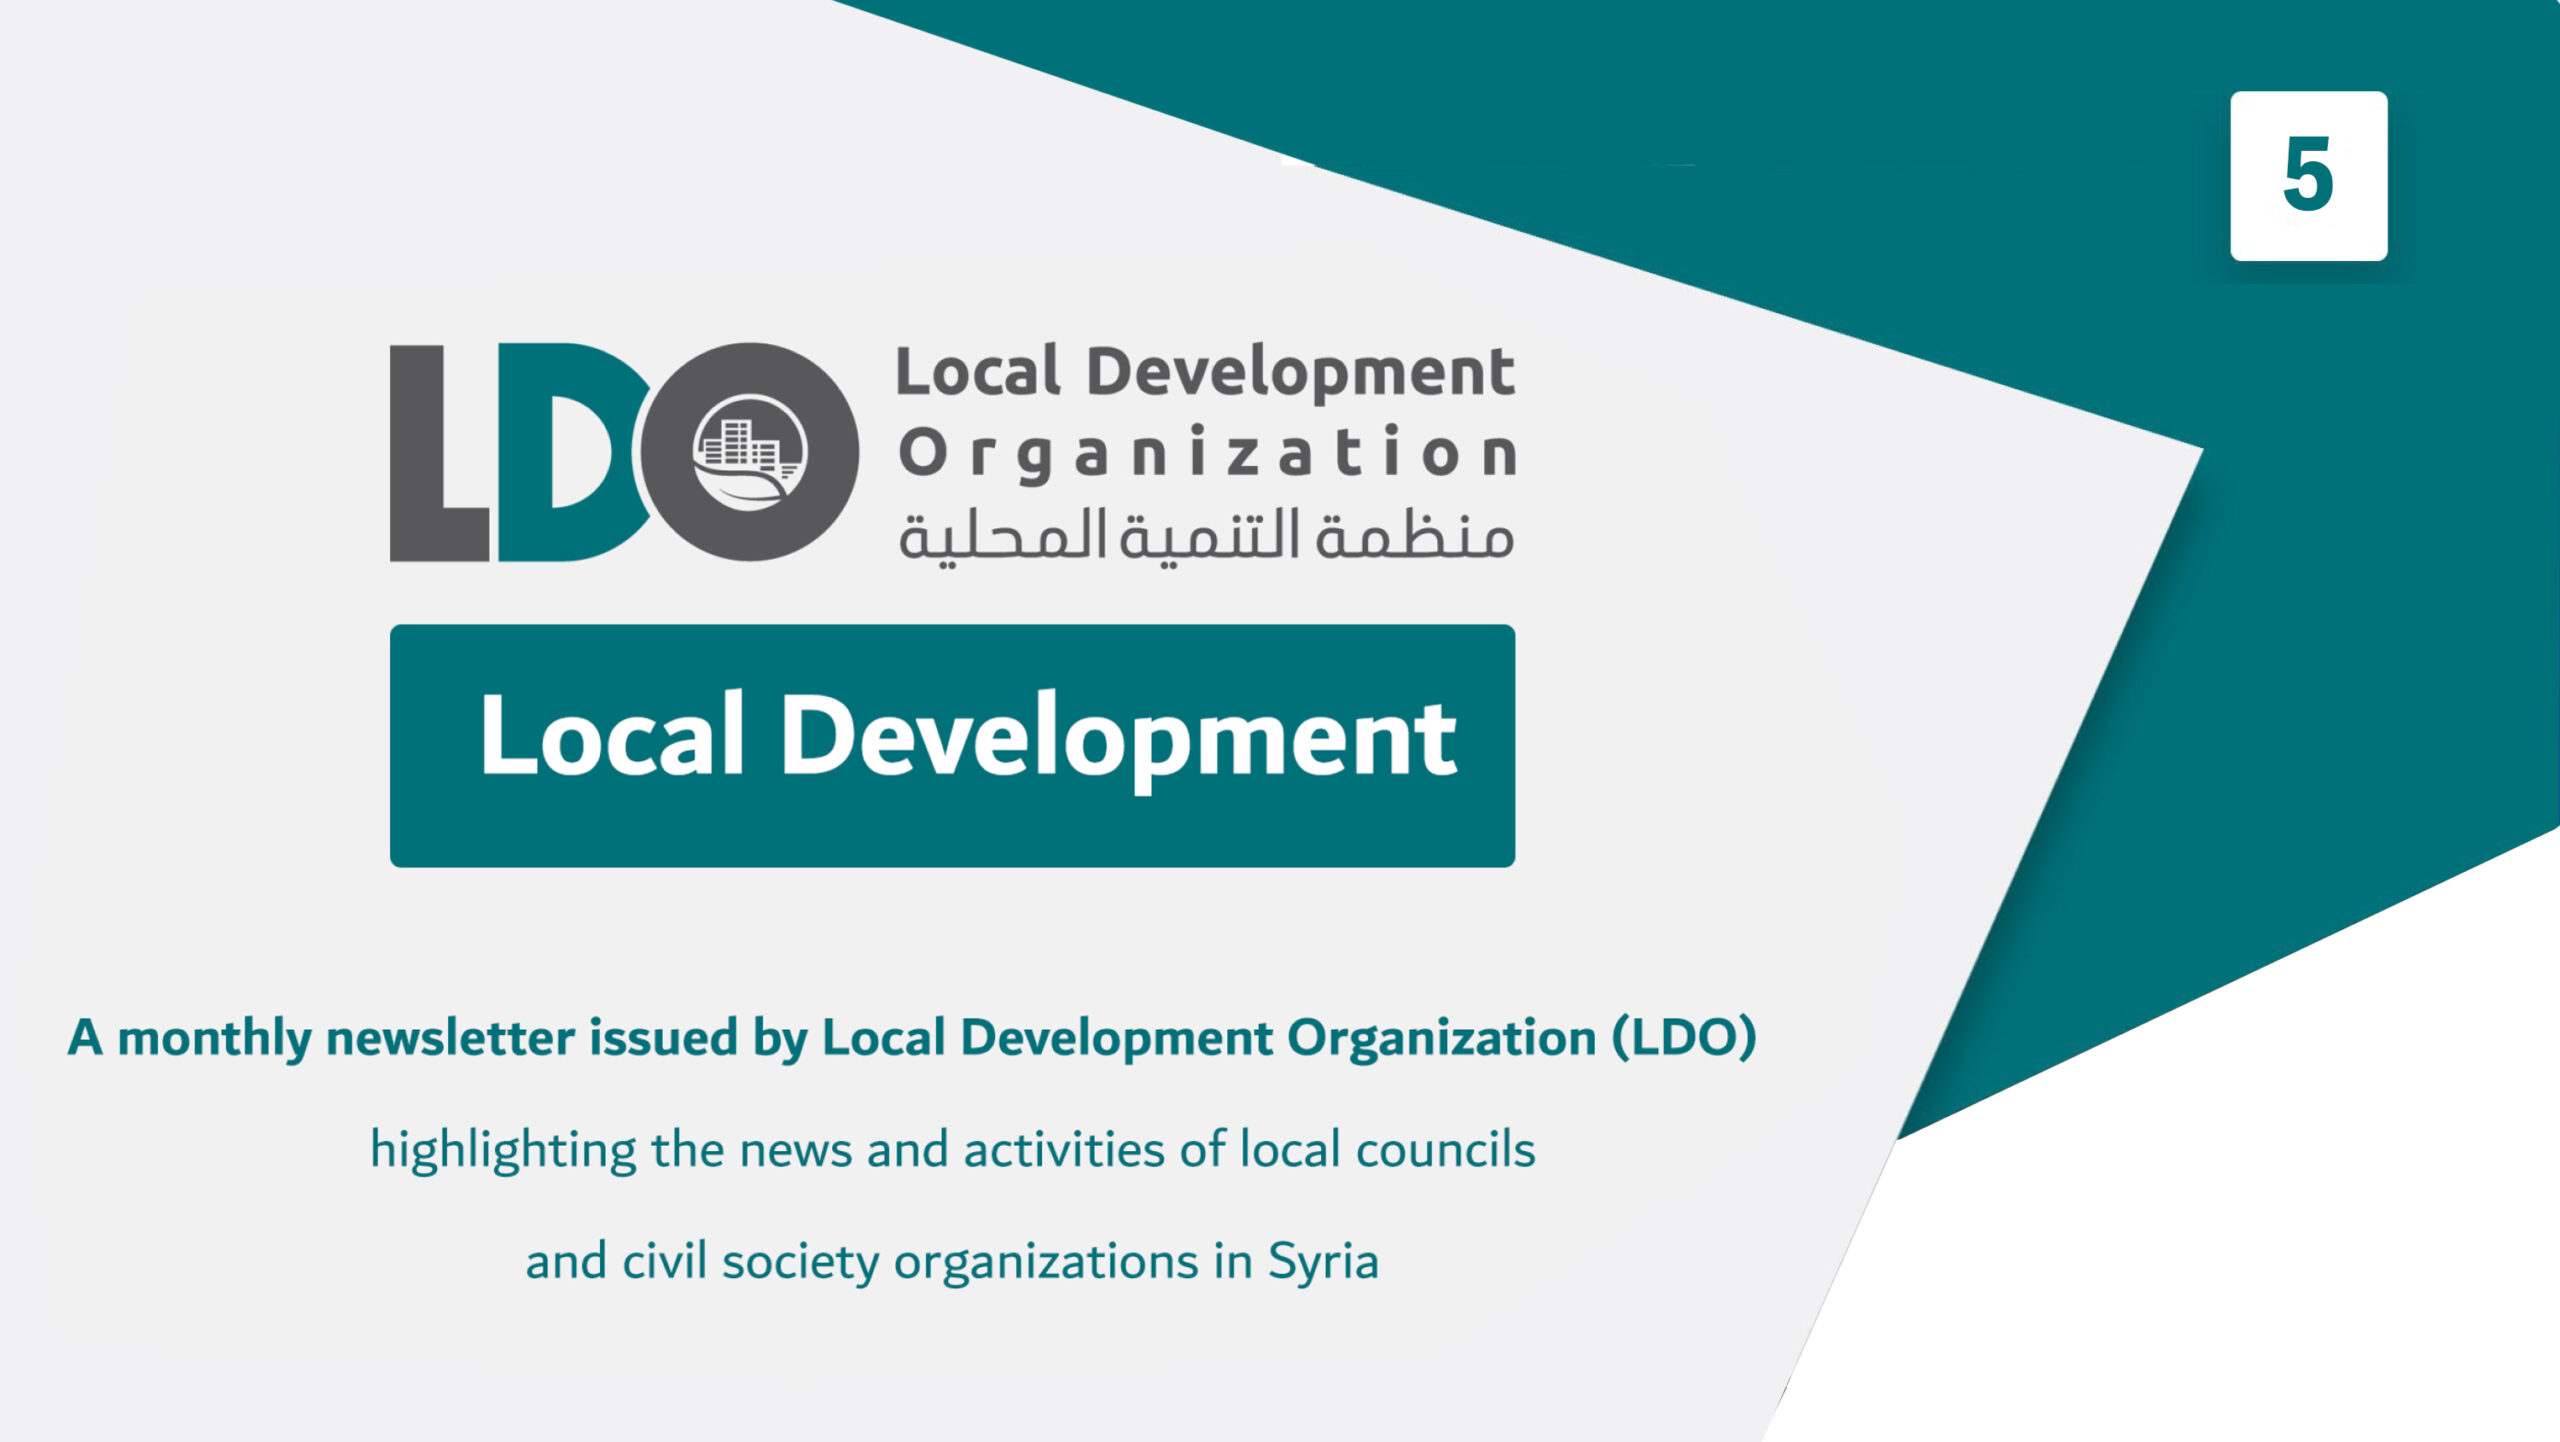 The Fifth issue - Local Development